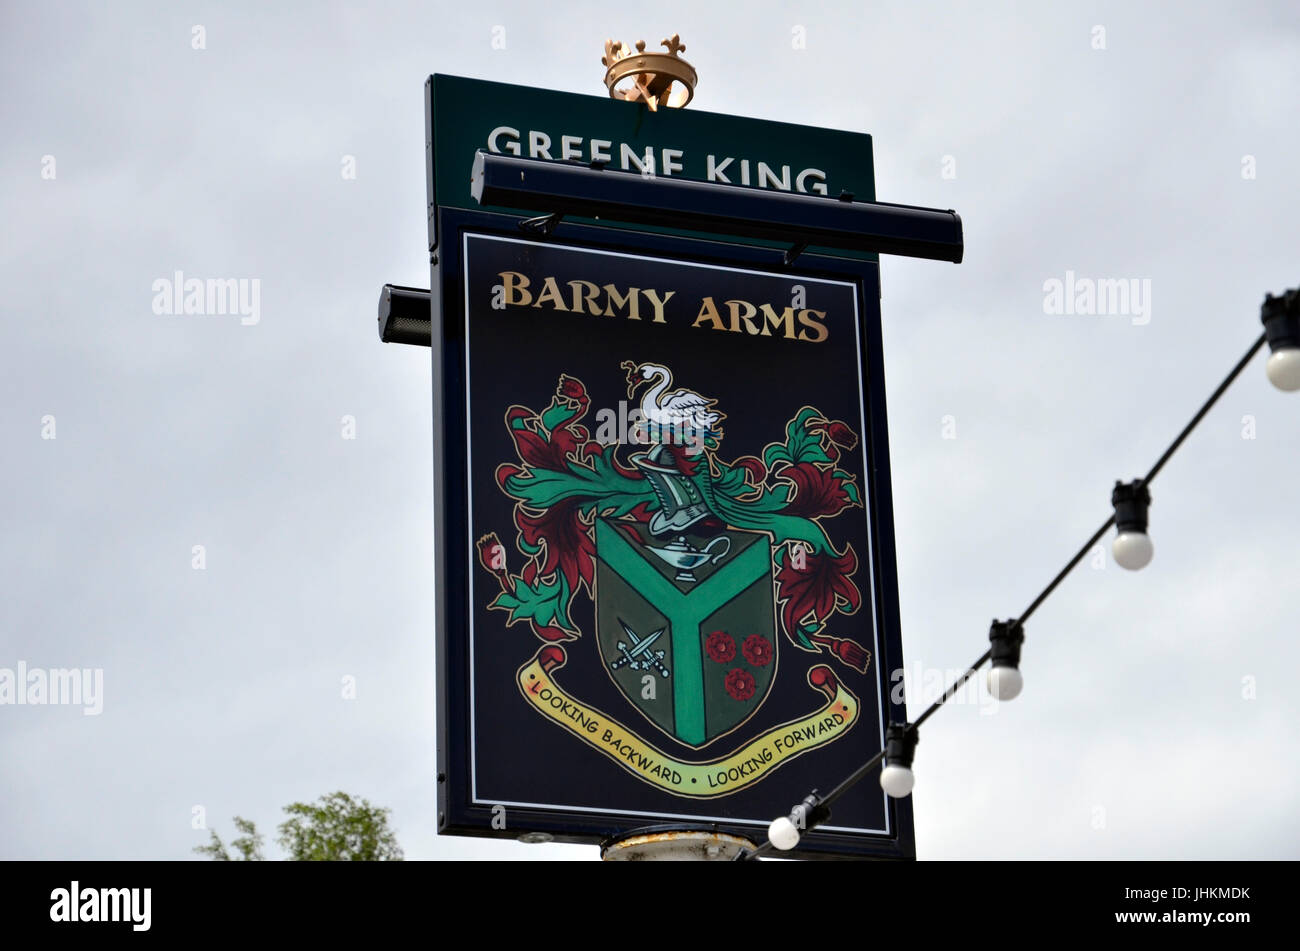 The Barmy Arms public house on the River Thames in Twickenham, London Stock Photo